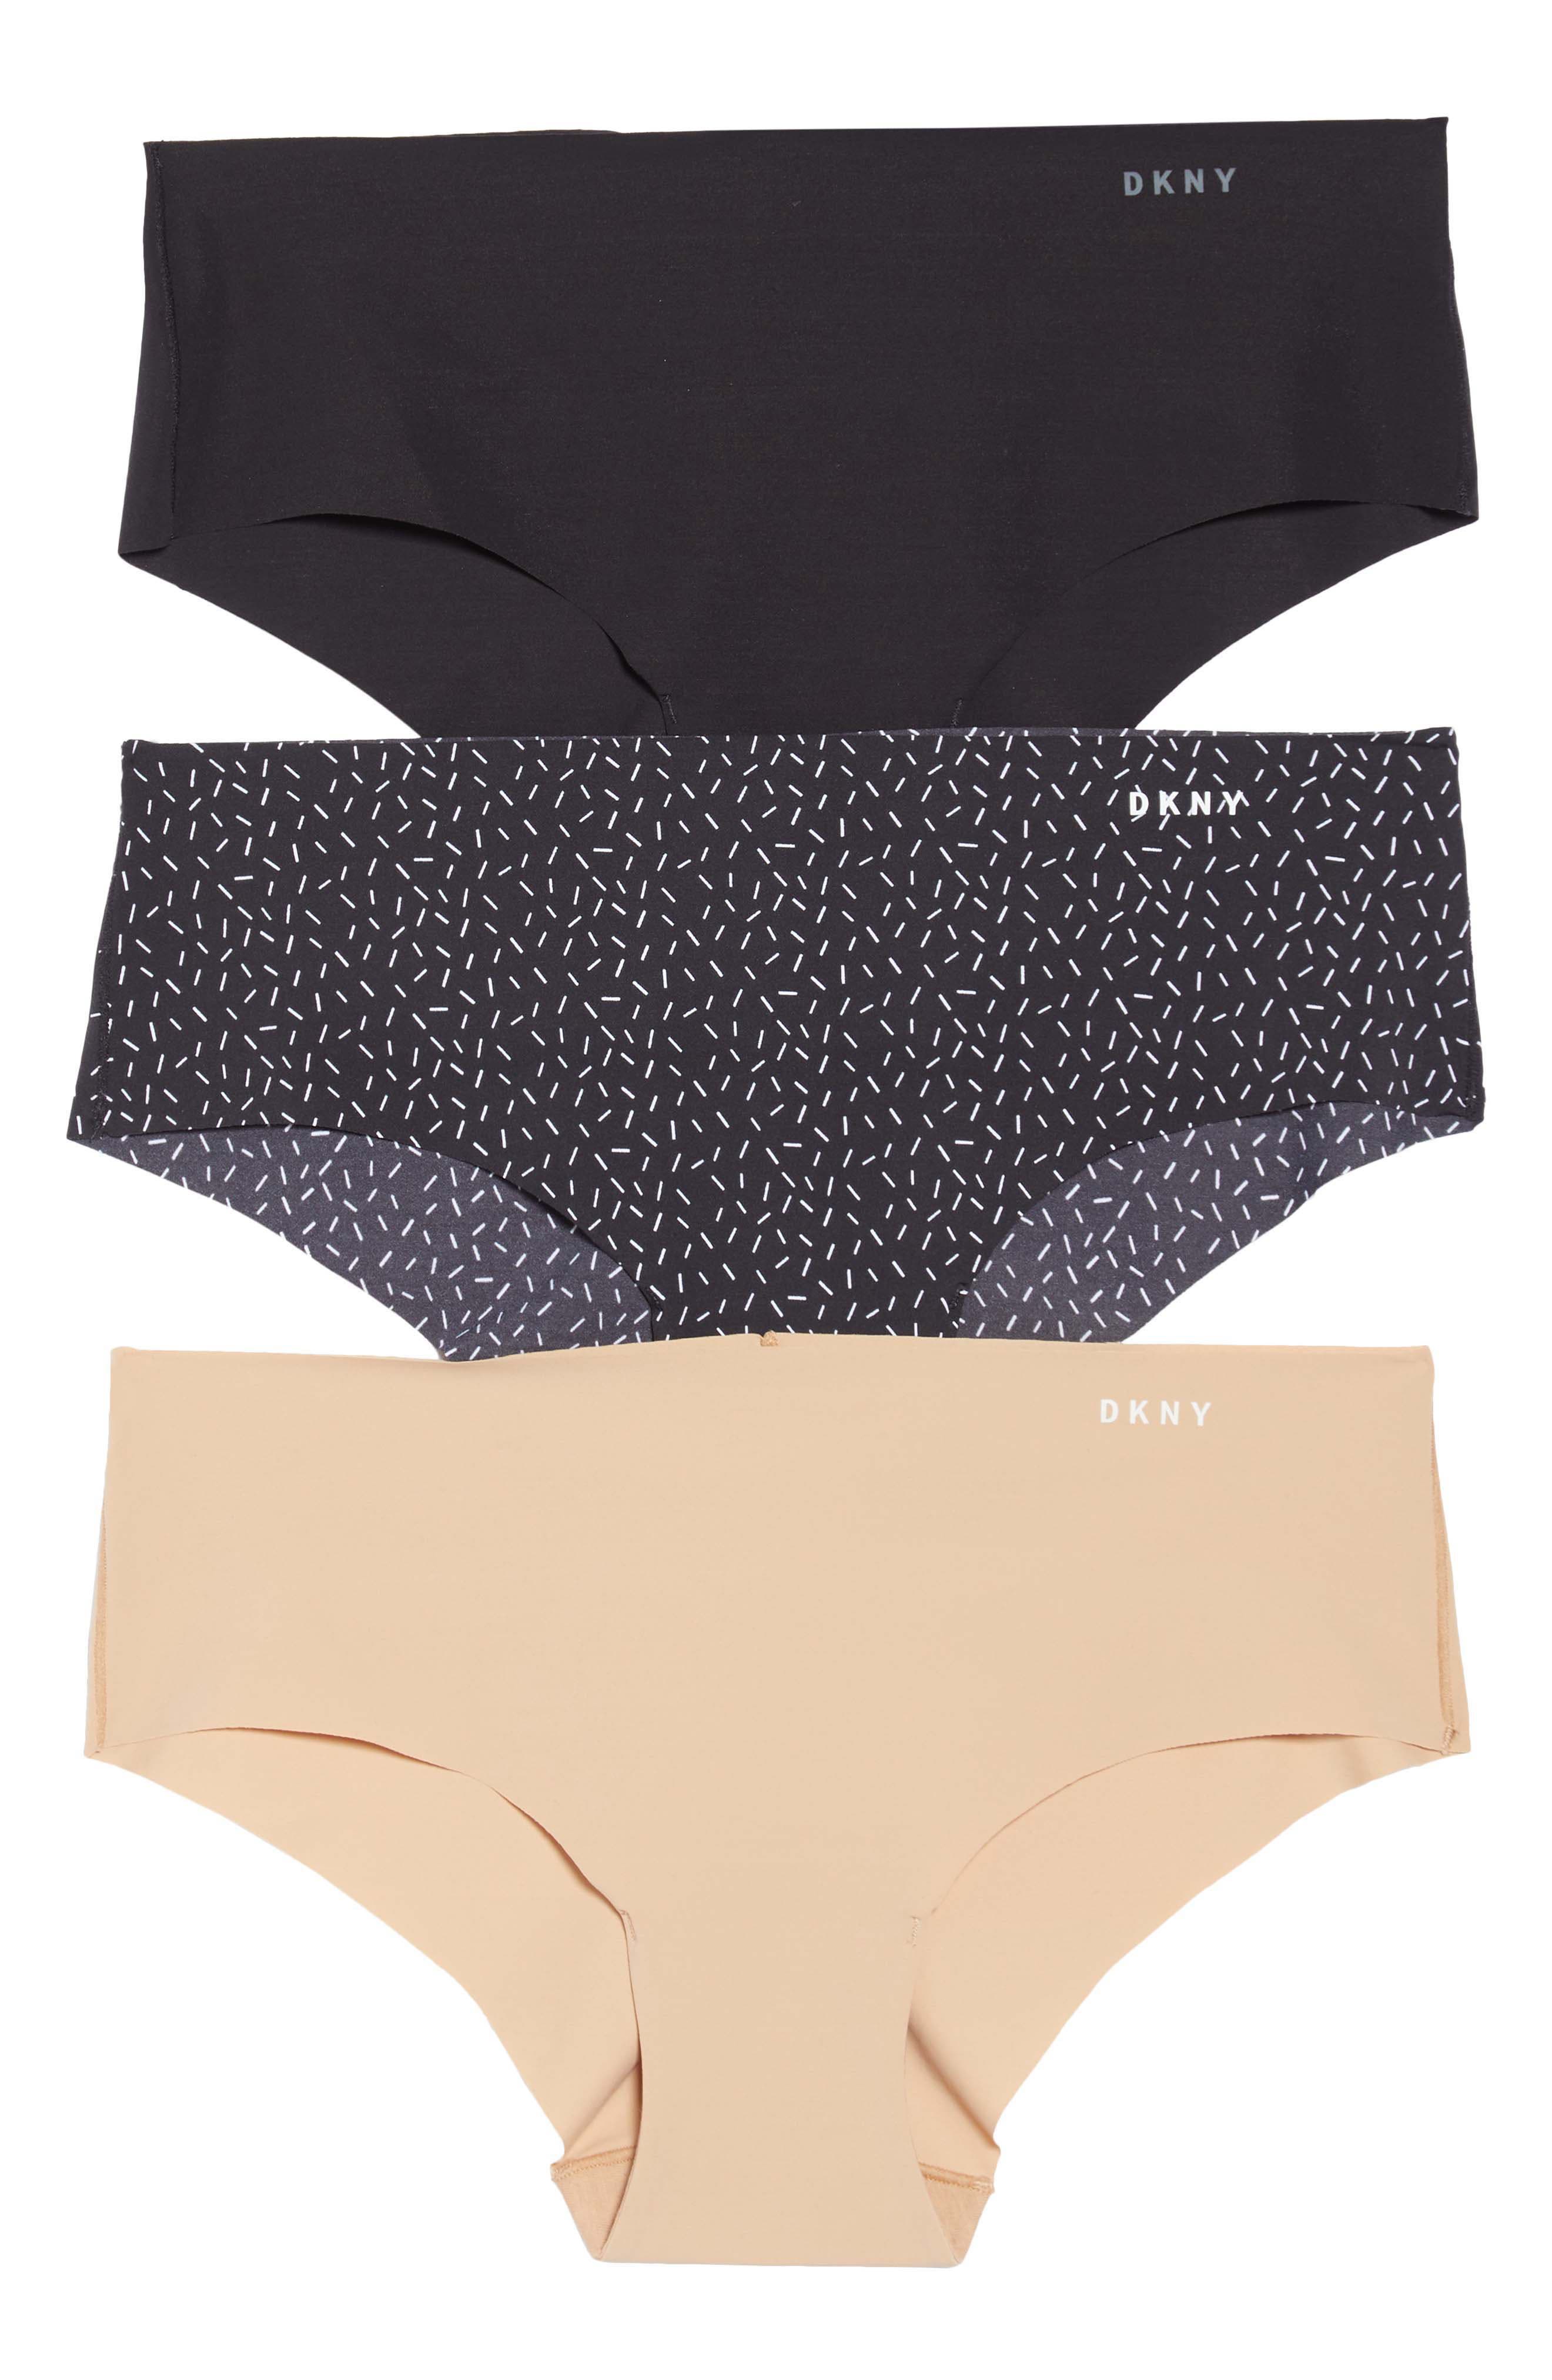 DKNY Litewear Cut Anywhere 3-Pack Hipster Briefs in Blck/glow/rosewtr Tic Toss at Nordstrom, Size X-Large